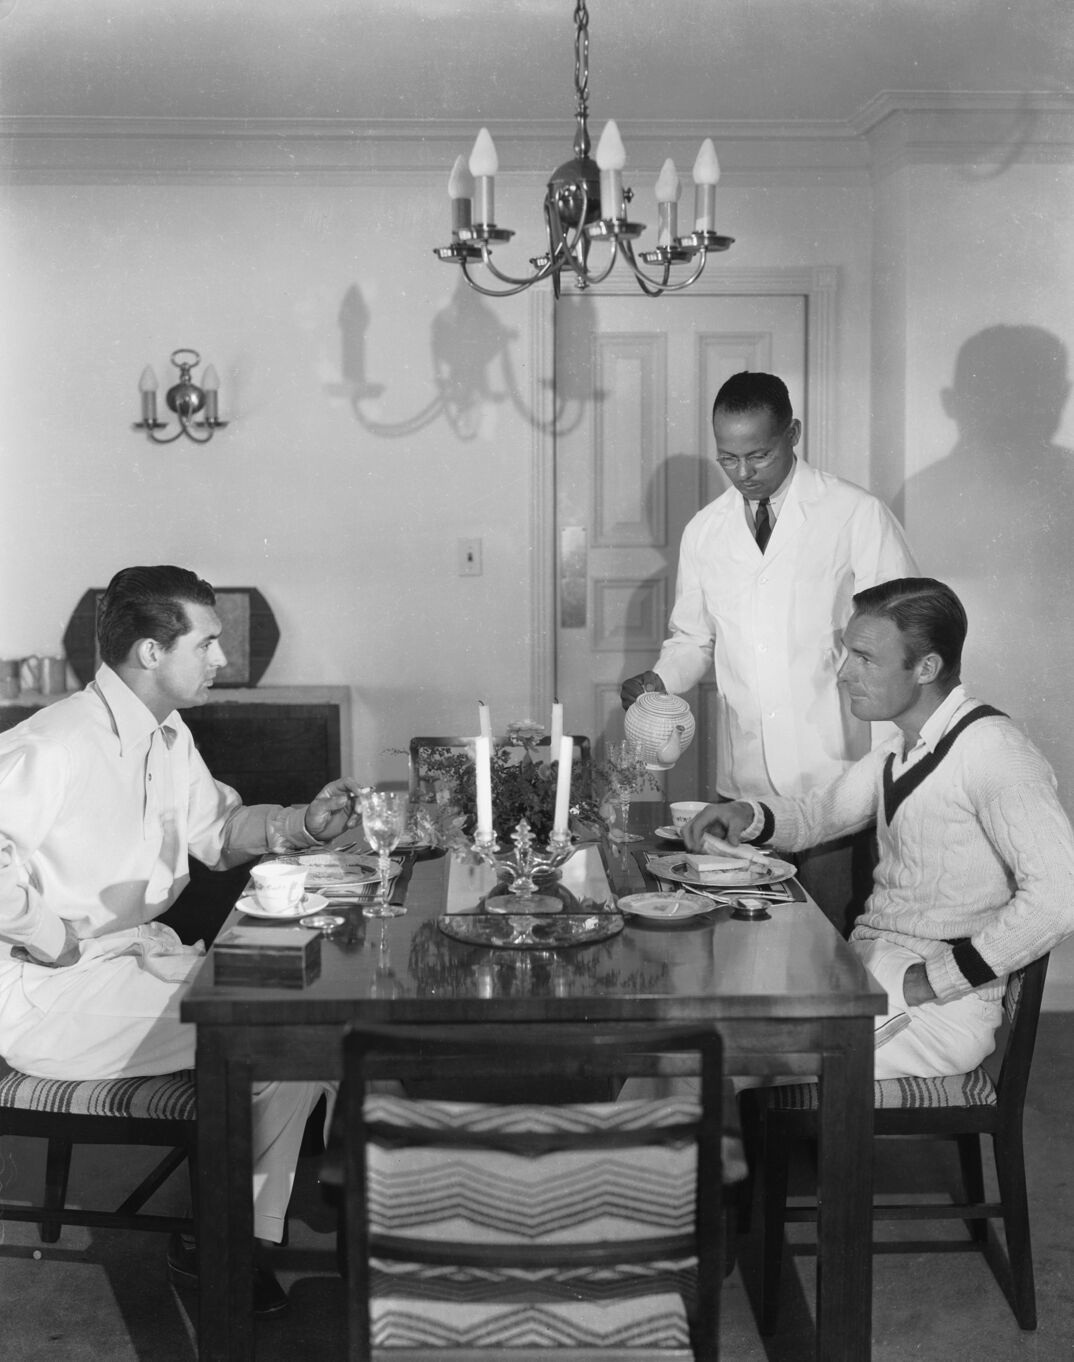 1935:  A servant pouring tea for the British born actor Cary Grant (1904 - 1986), born Archibald Leach, and the American actor, Randolph Scott (1898 - 1987) in the beach house which the two men shared during the 1930's, which was jokingly known as Bachelor Hall.  (Photo via John Kobal Foundation/Getty Images)